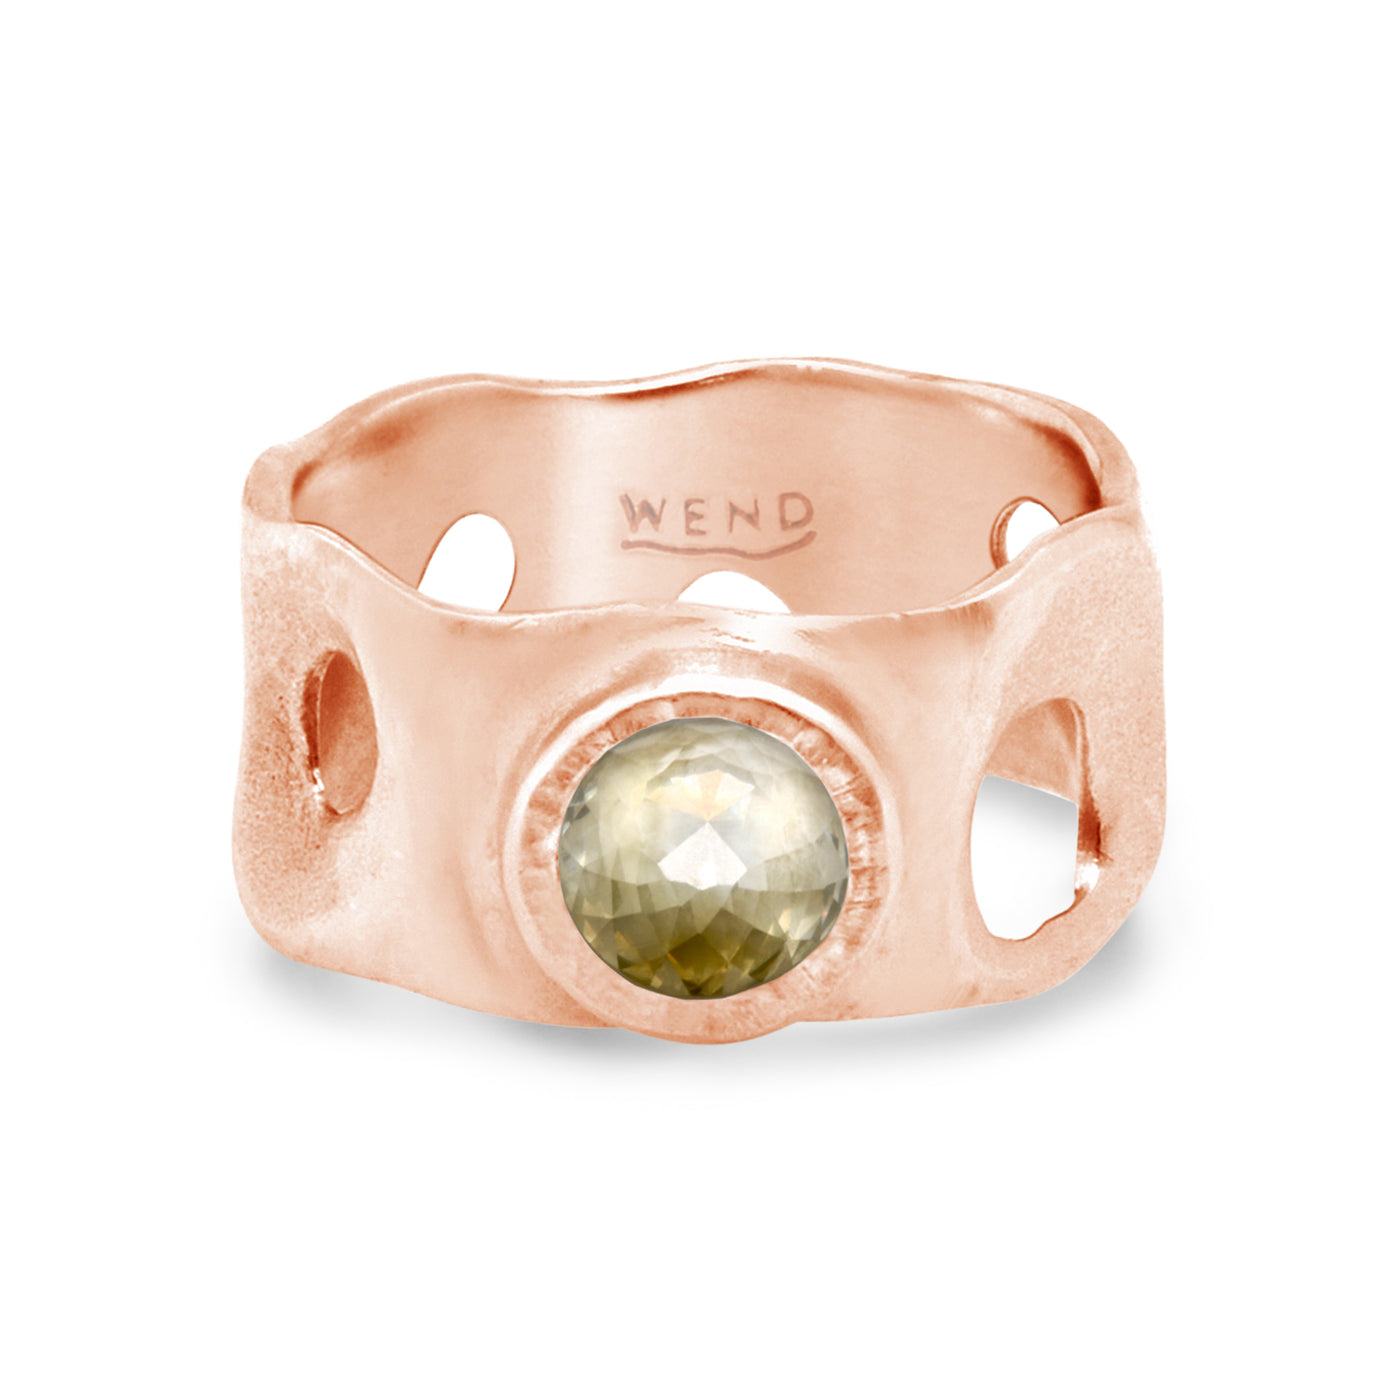 Tidepools ring band inspired by ocean tide pools with a rustic diamond in certified recycled gold by WEND Jewelry #gemstone-size_6mm